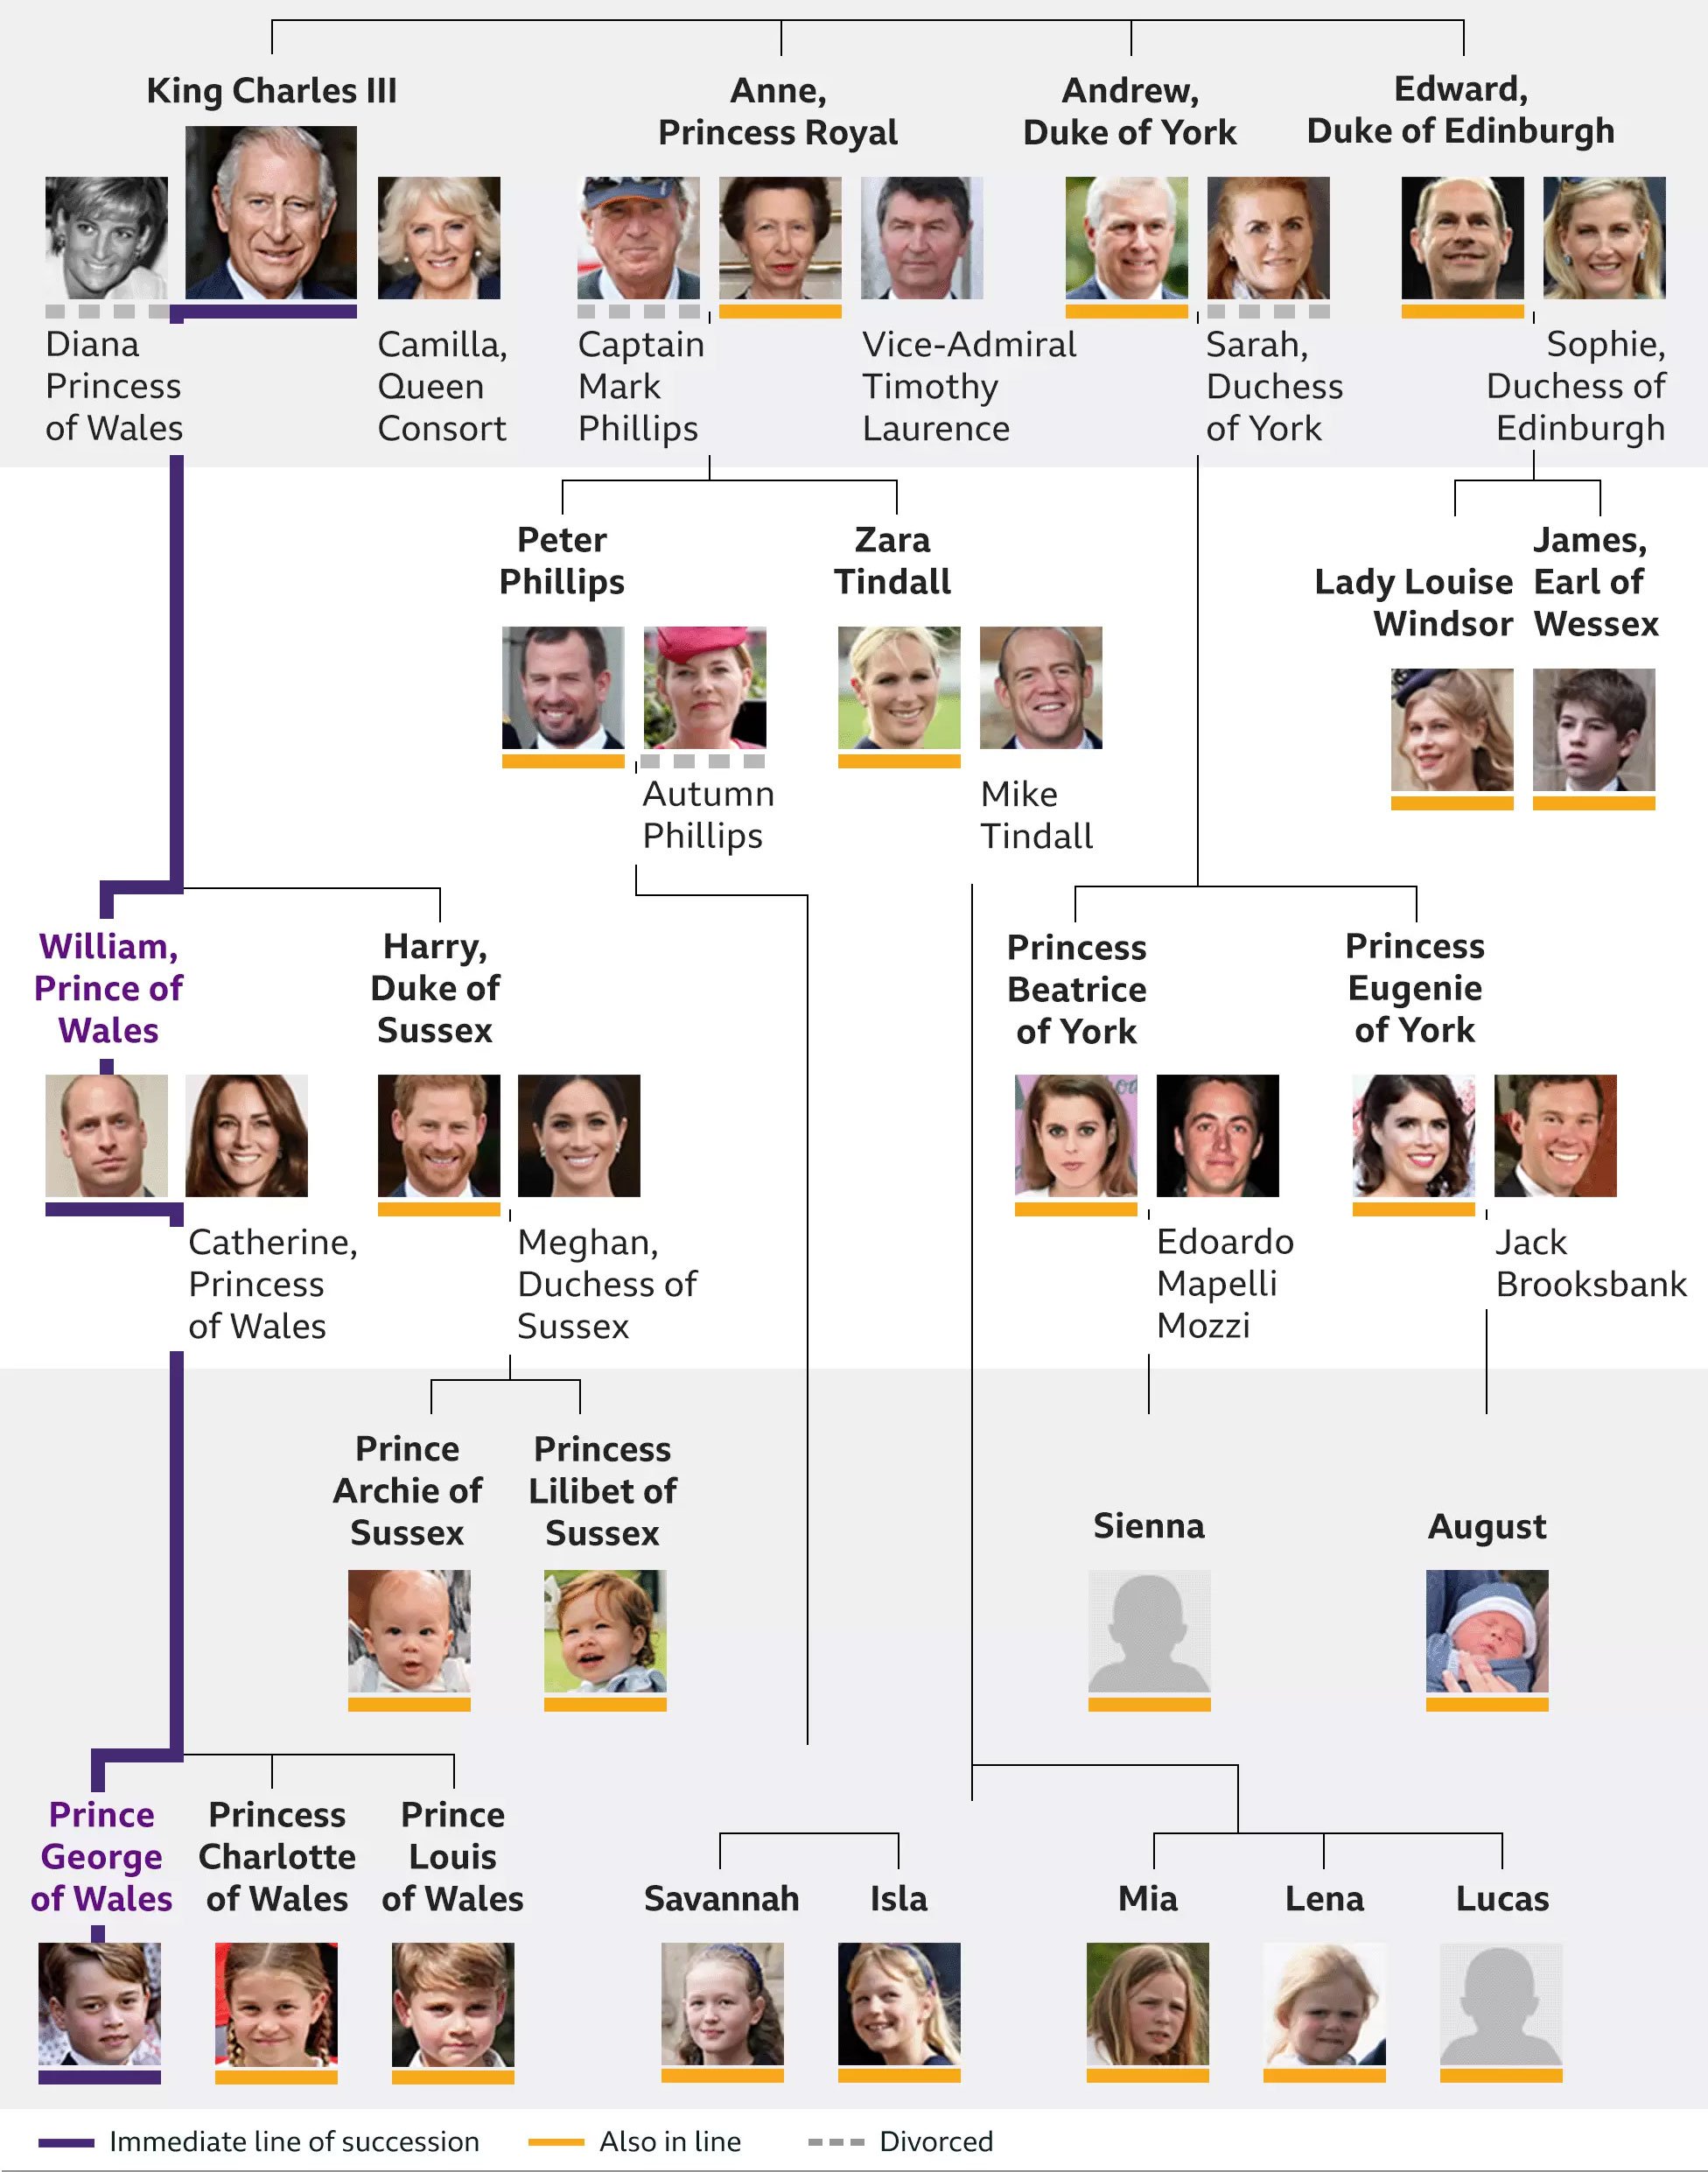 Royal Family Tree: Who is the next in line to the throne after King Charles III?